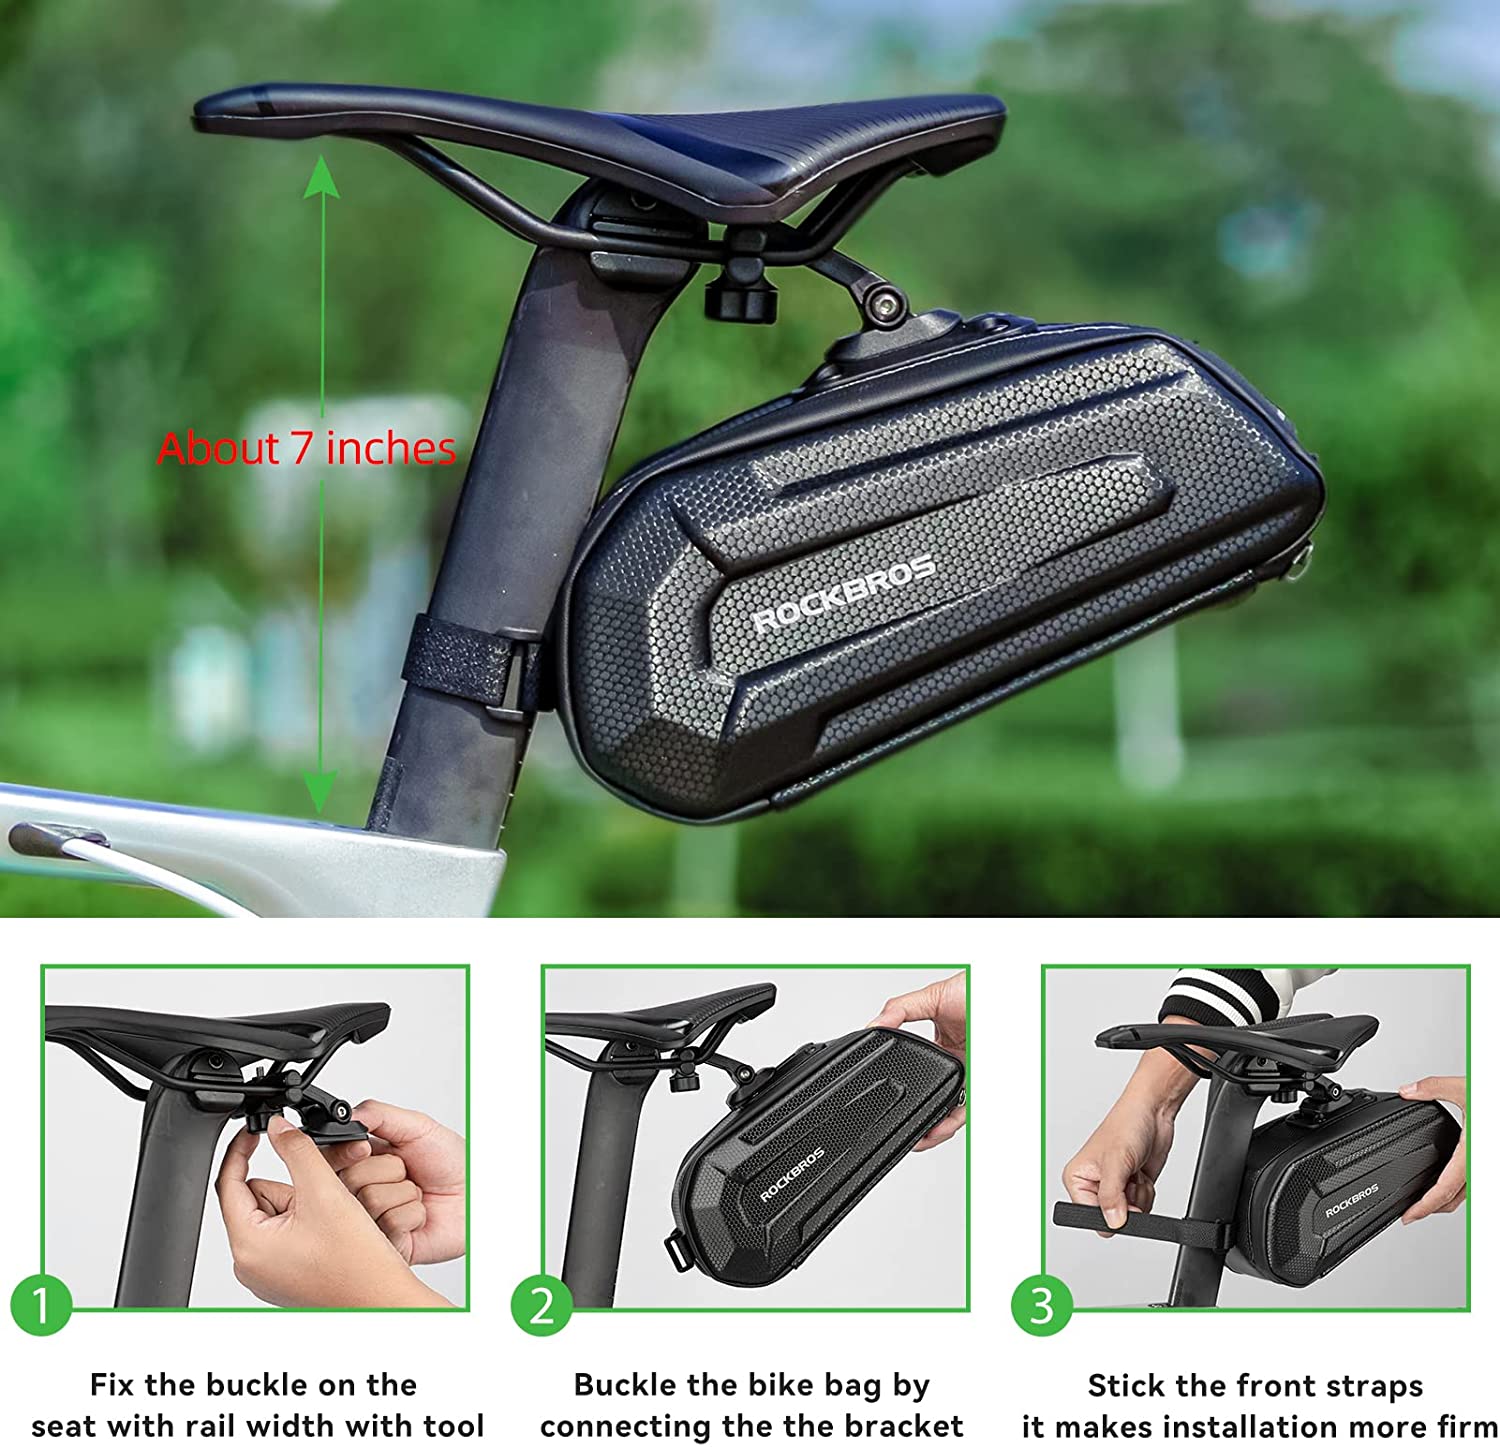 ROCKBROS Bicycle Bag Cycling Portable Nylon Mini Tail Pocket Small  Reflective Seat Saddle Rear Package MTB Road Bike Accessories